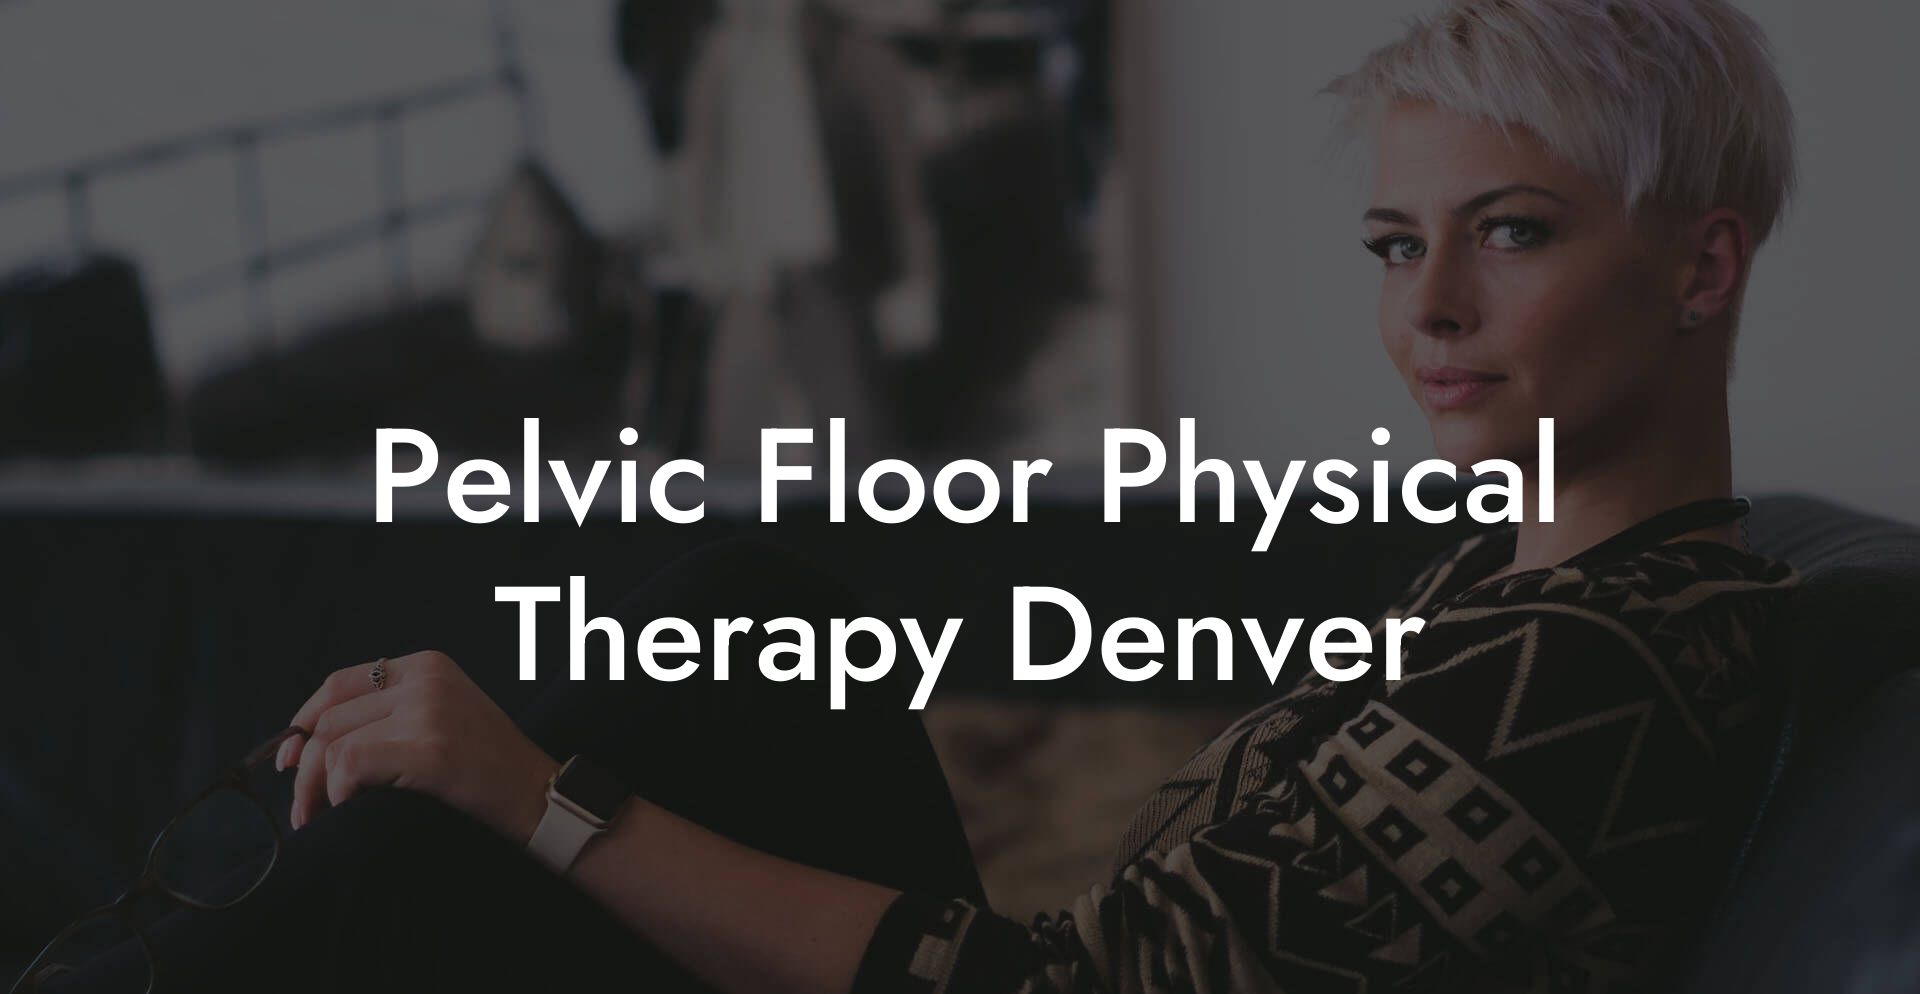 Pelvic Floor Physical Therapy Denver